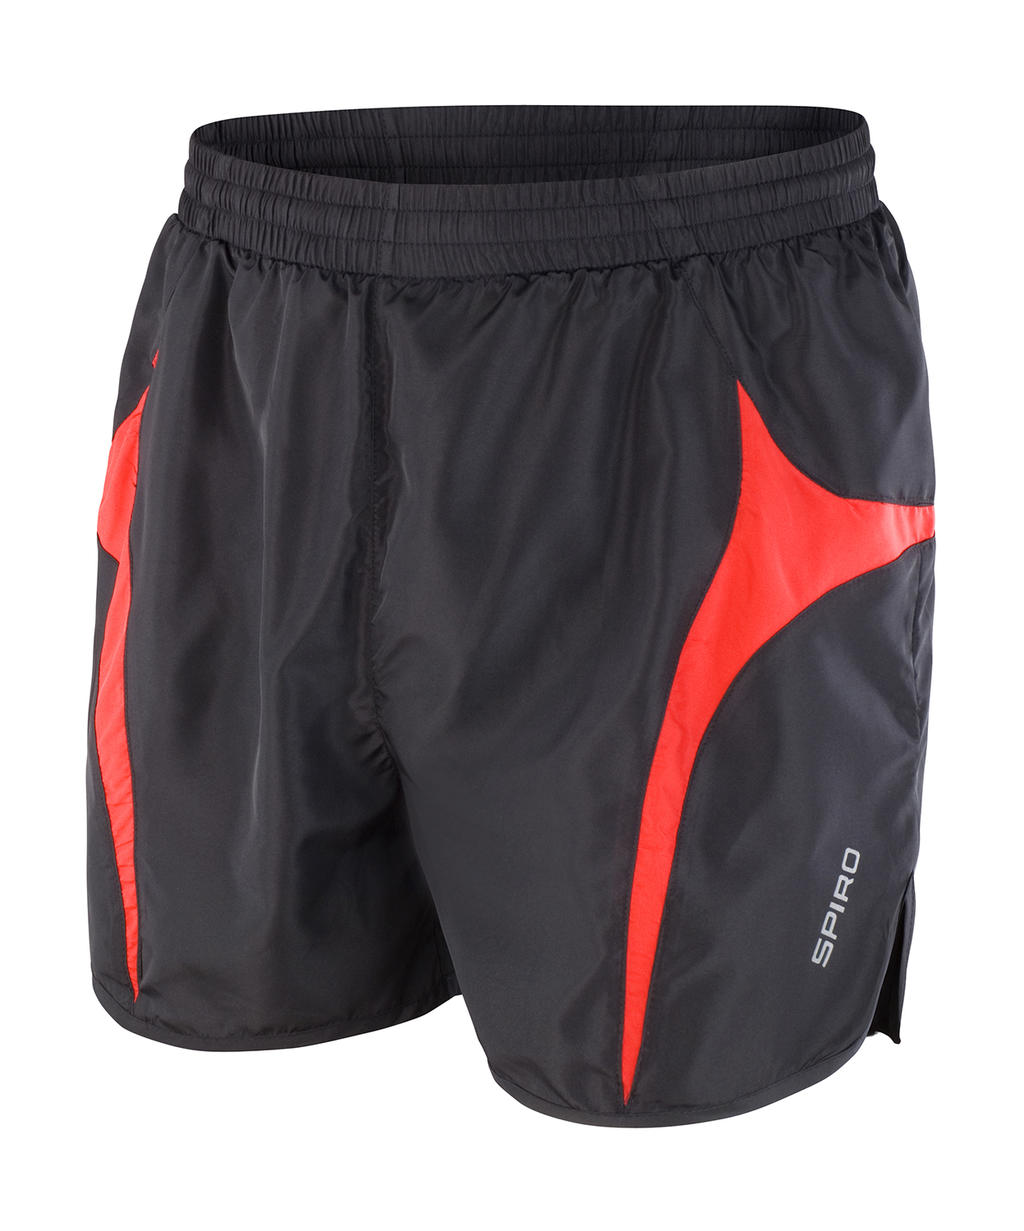  Unisex Micro Lite Running Shorts in Farbe Black/Red